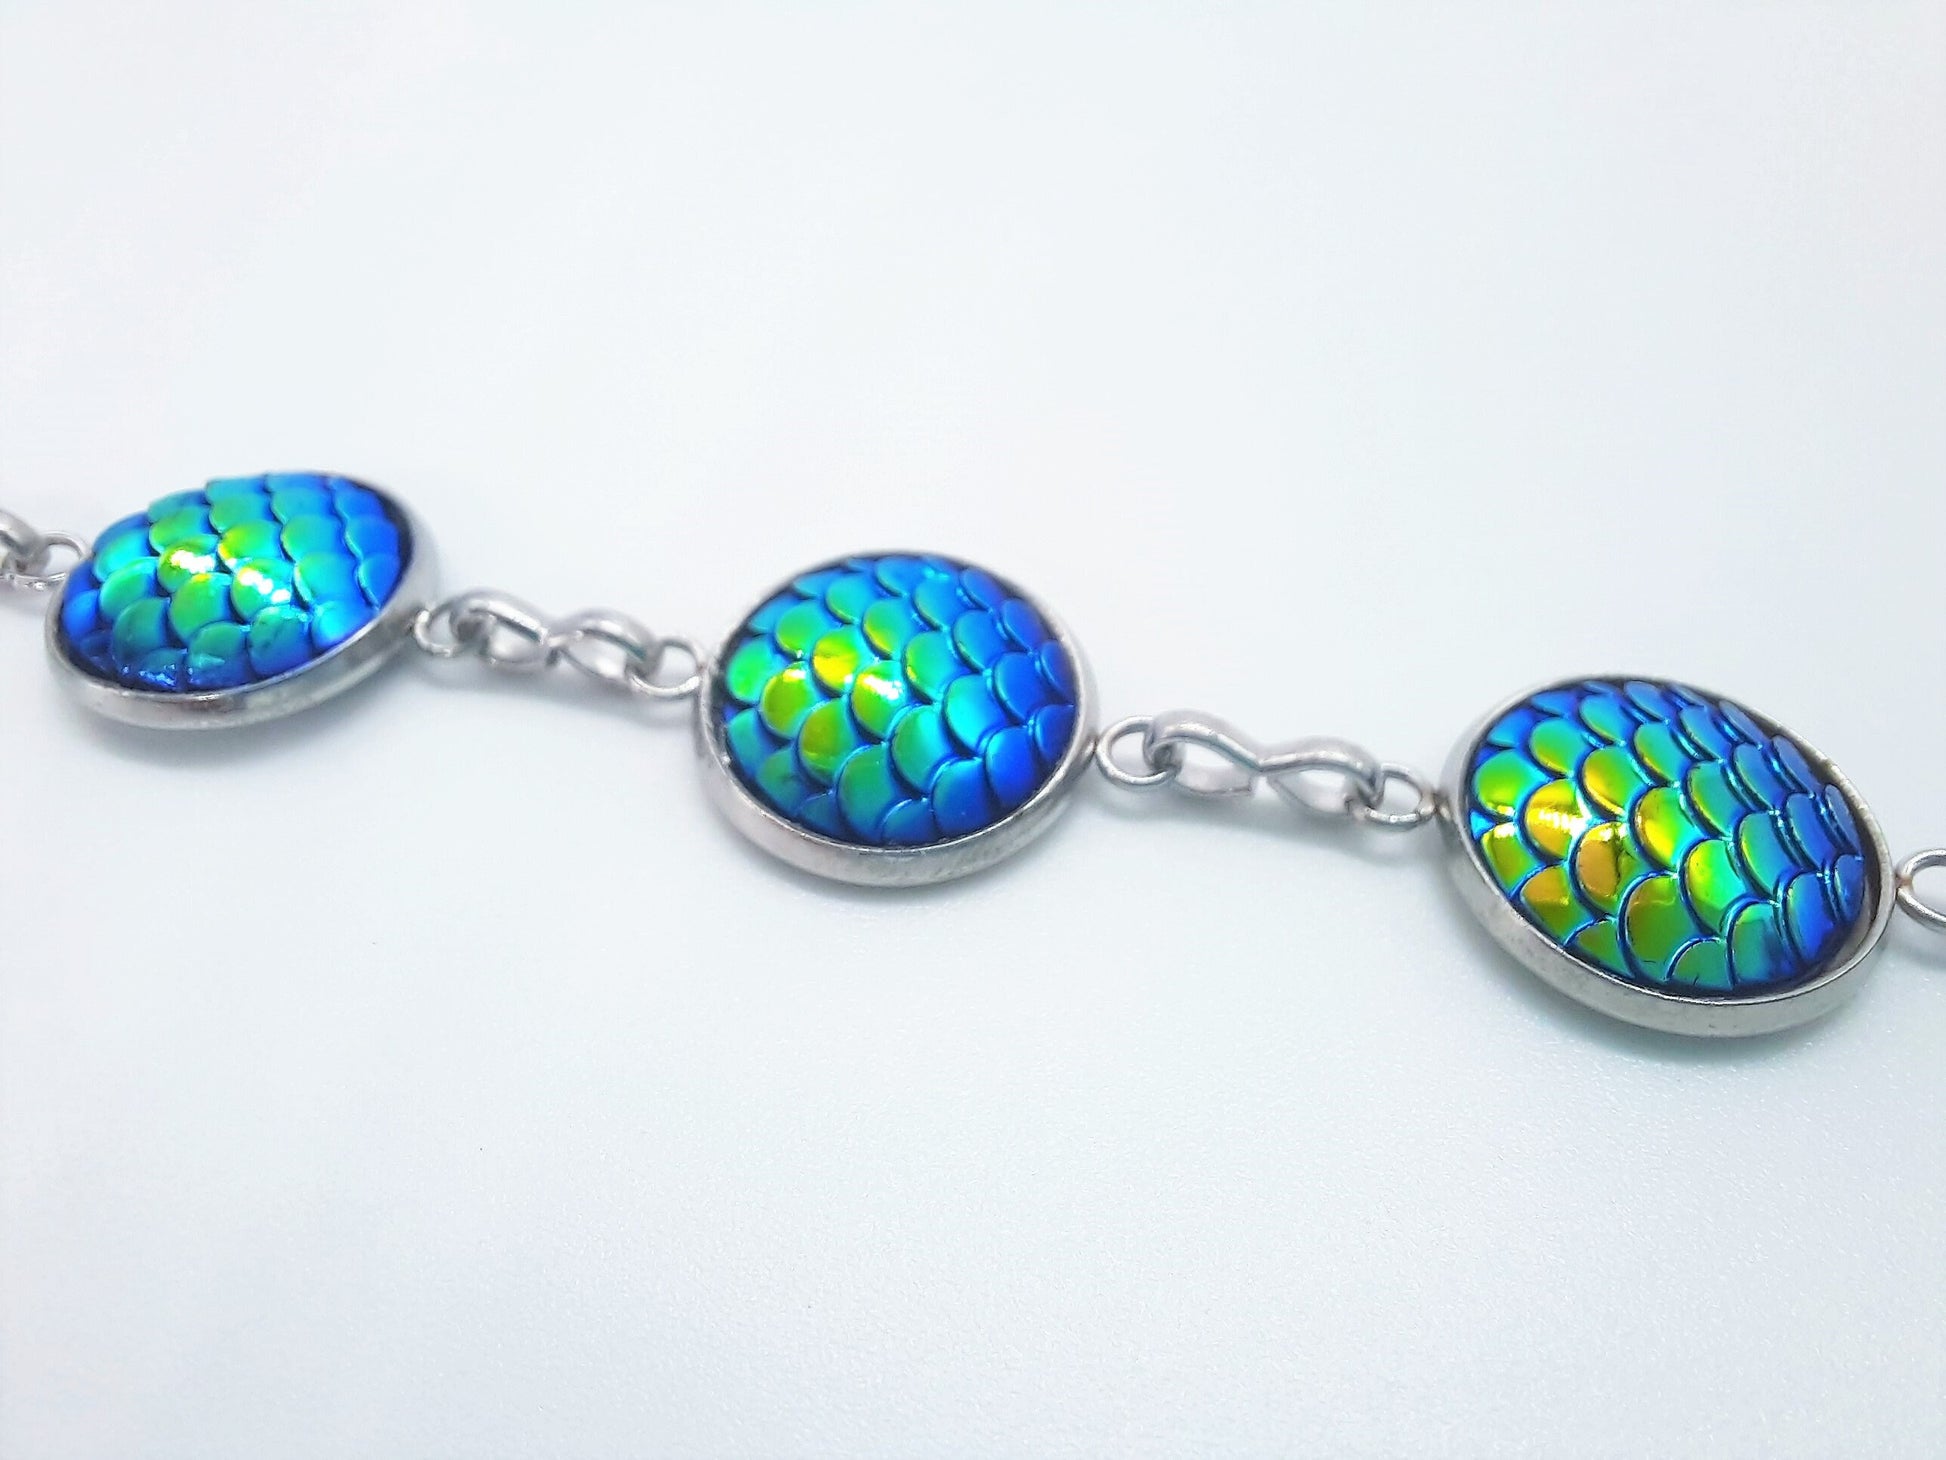 Handcrafted Blue - Green Iridescent Mermaid Scale Link Bracelet - Hypoallergenic Silver Stainless Steel - Adjustable - Lobster Claw Closure